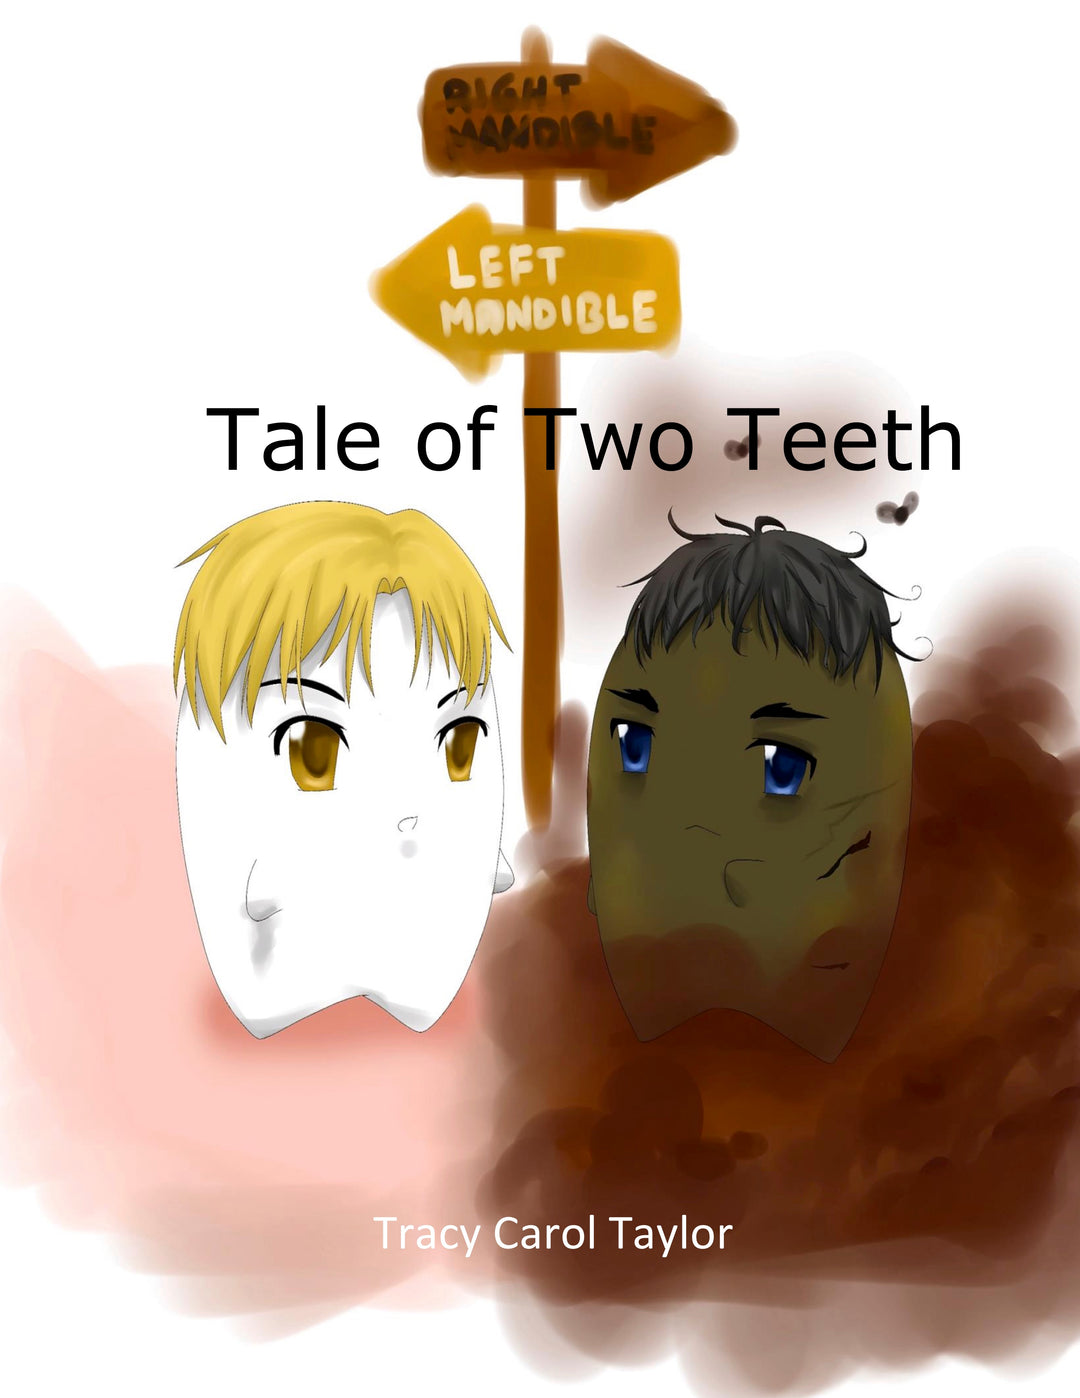 Tale of Two Teeth - Juvenile Fiction / Action & Adventure - Dental Fiction